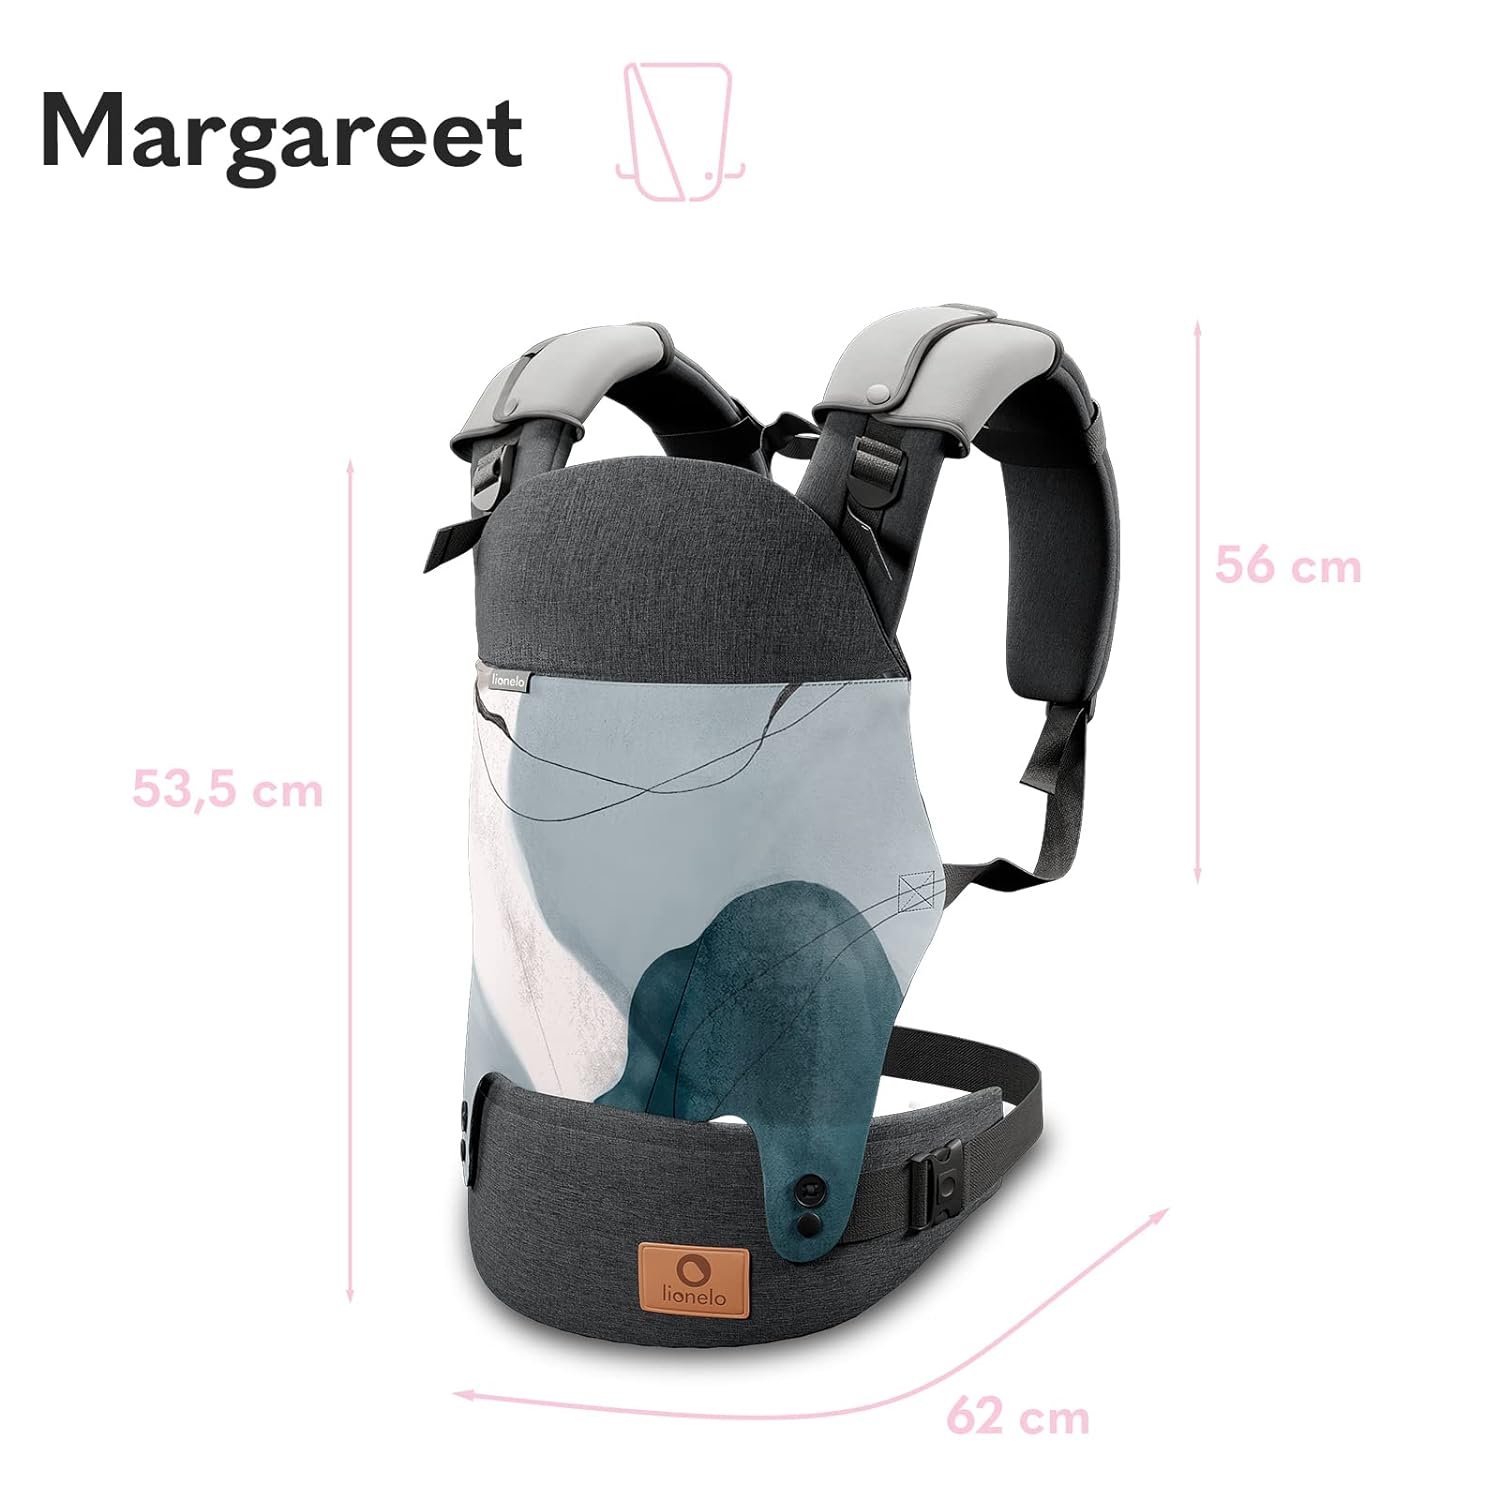 Lionelo Margareet Baby Carrier 3 Carrying Positions Correct Position of Baby Retractable Hood Double Protection Skin-friendly Materials Belt TÜV Certificate (Multi-Colour)